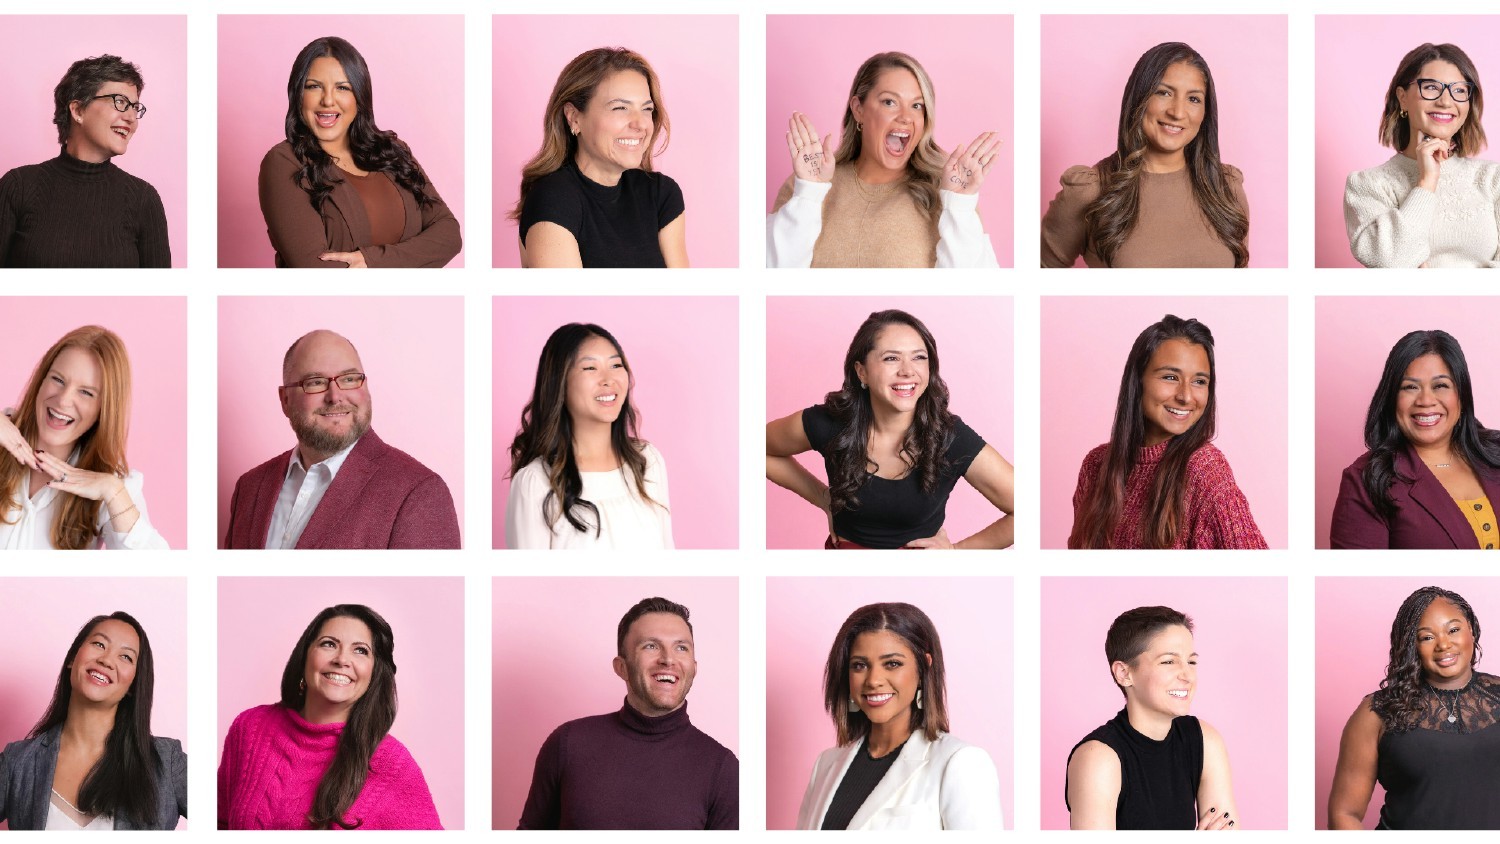 A small selection of some of our team's headshots